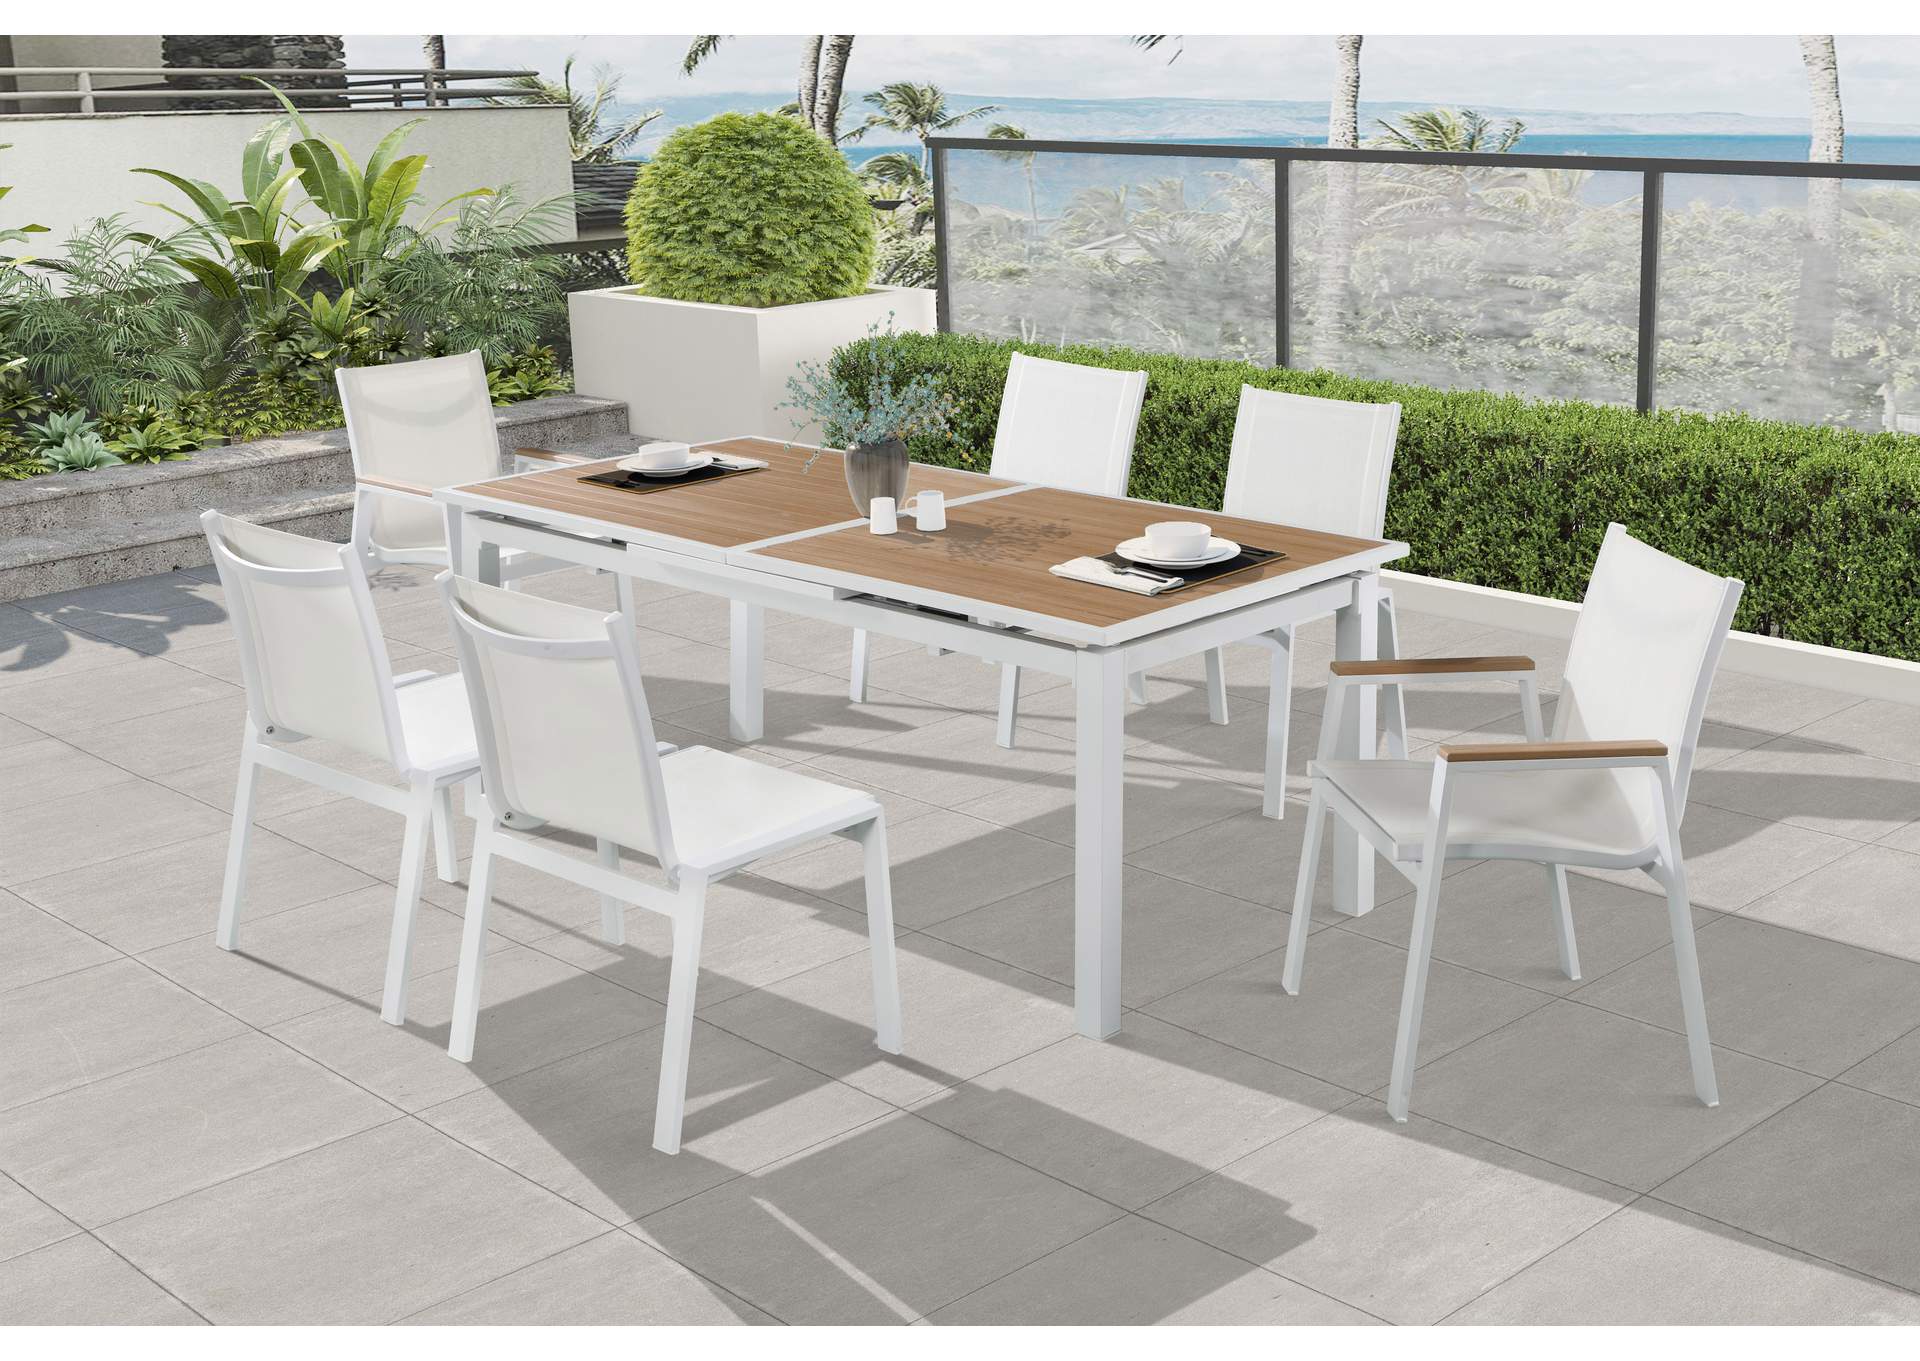 Nizuc Brown Wood Look Accent Paneling Outdoor Patio Extendable Aluminum Dining Table,Meridian Furniture